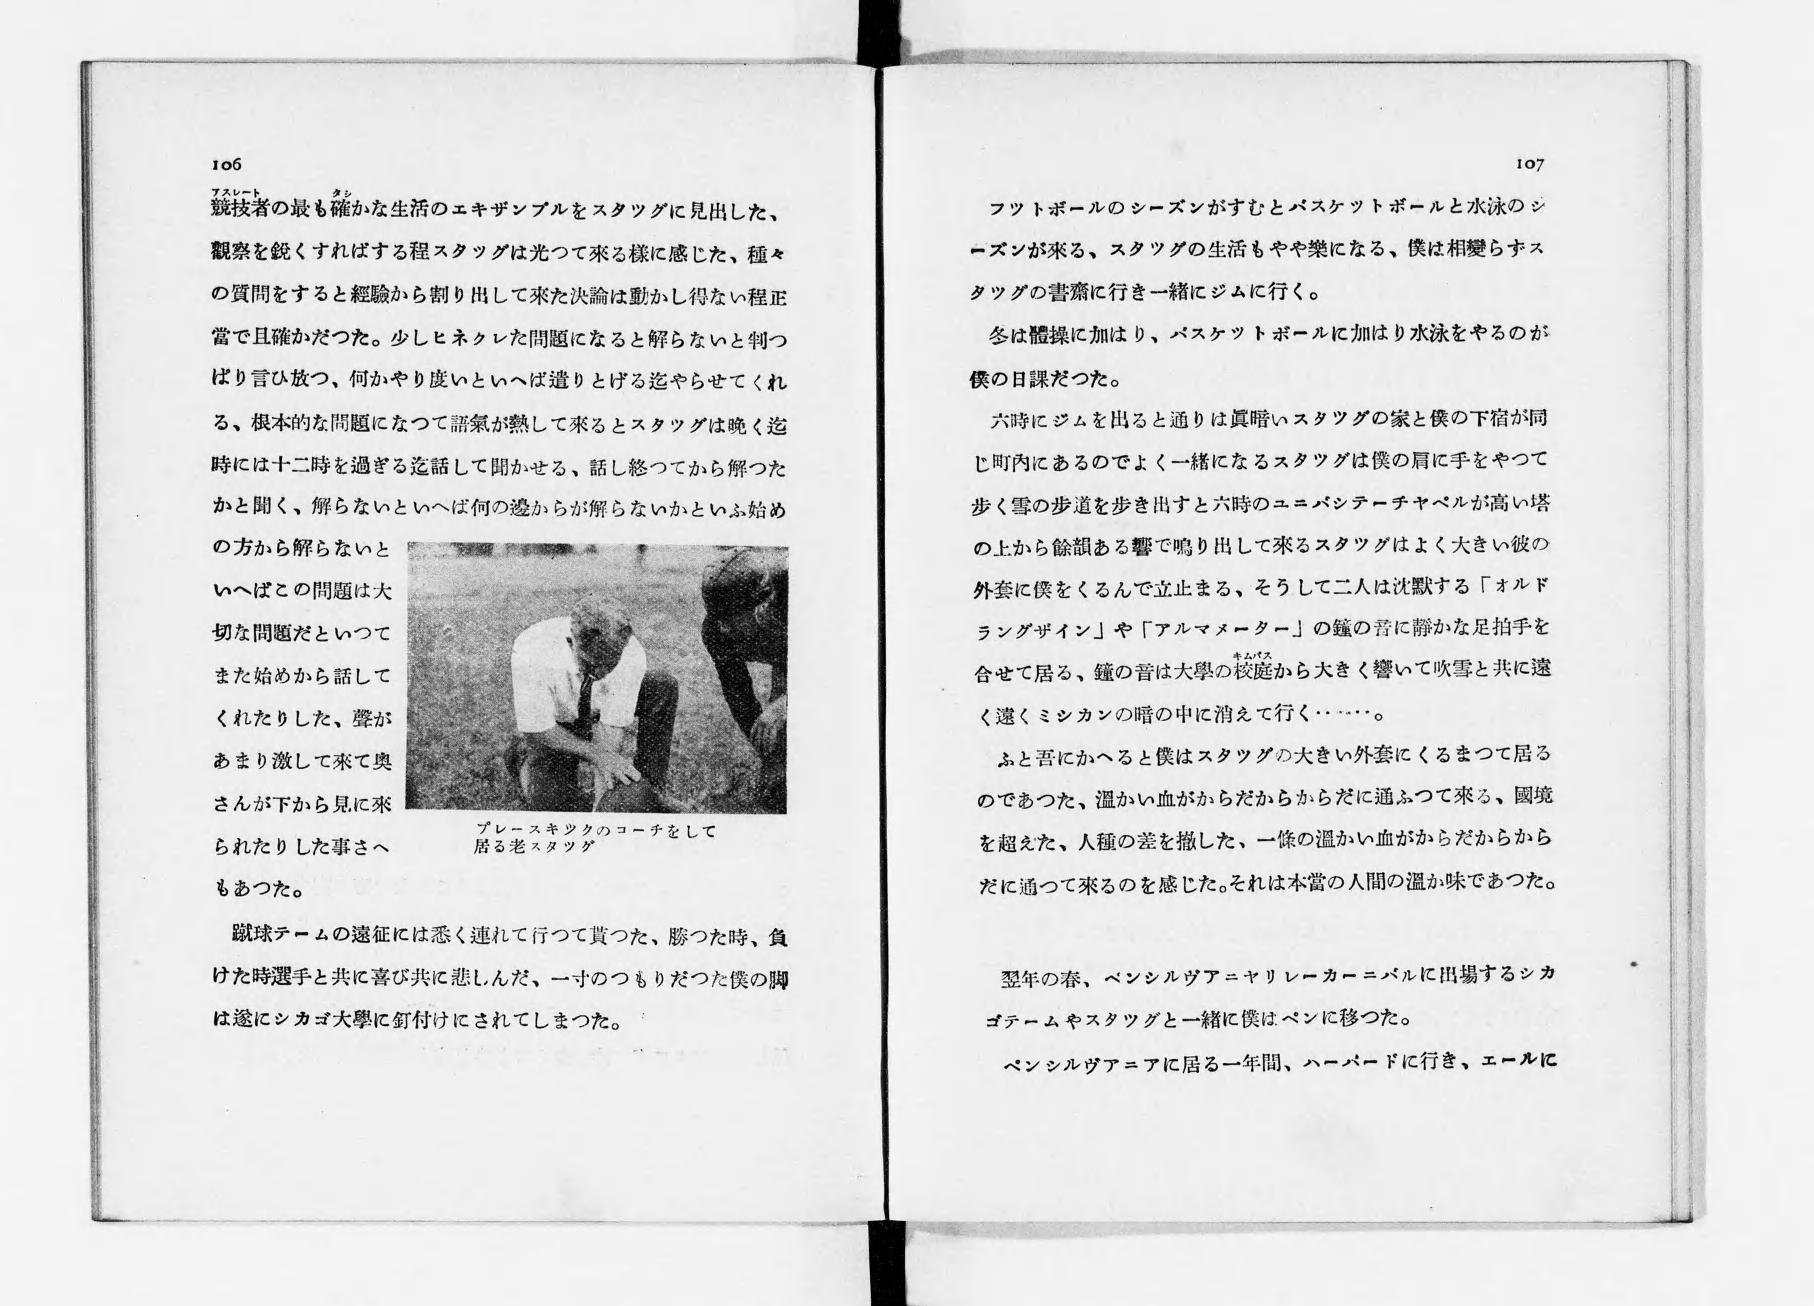 A scan of an open book written in Japanese. There is a photo of Stagg teaching a student a football technique.